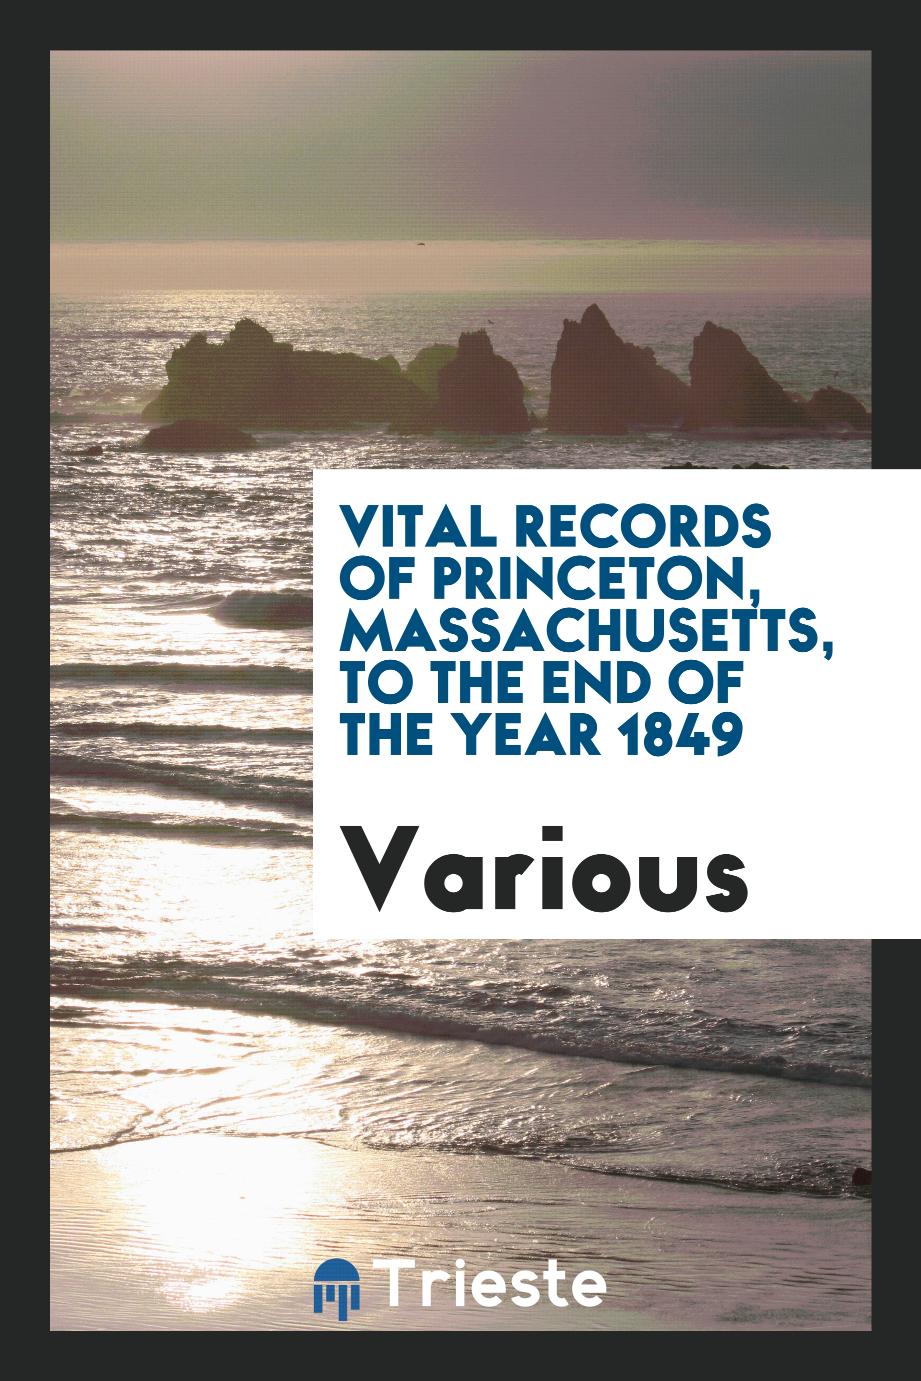 Vital records of Princeton, Massachusetts, to the end of the year 1849